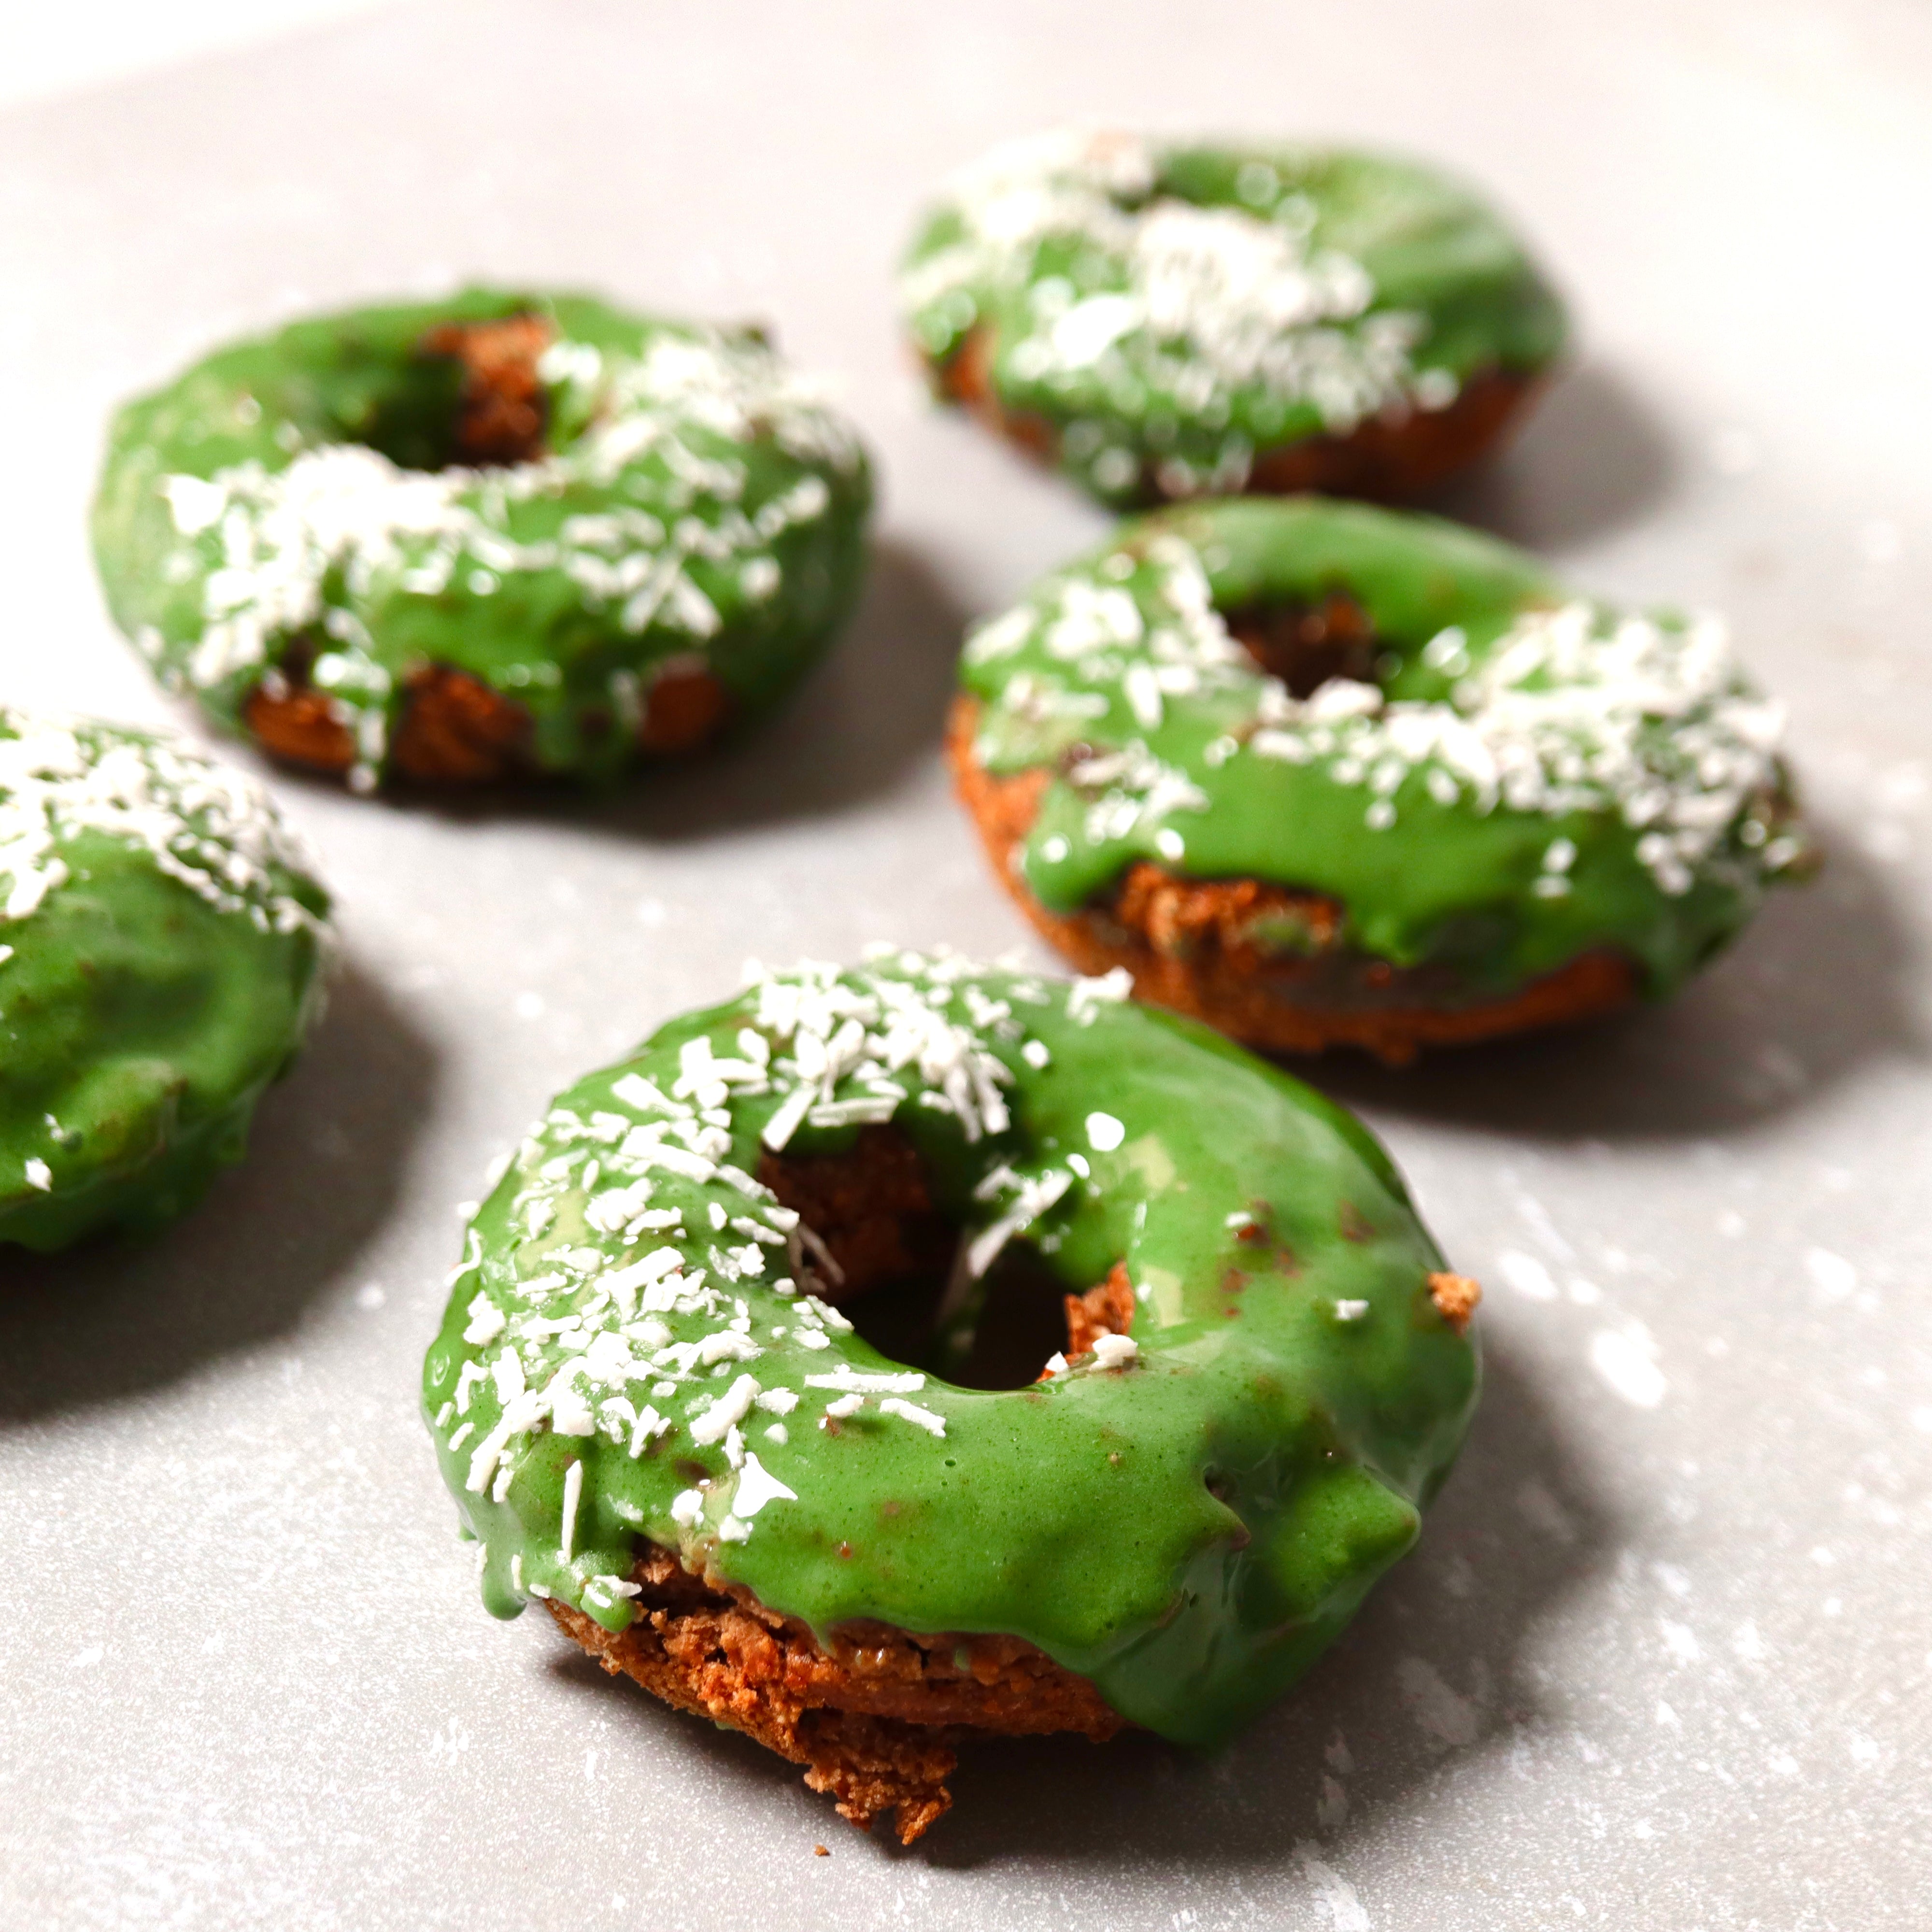 Green Brownie Donuts packed with cacao and vitamins and minerals from super greens